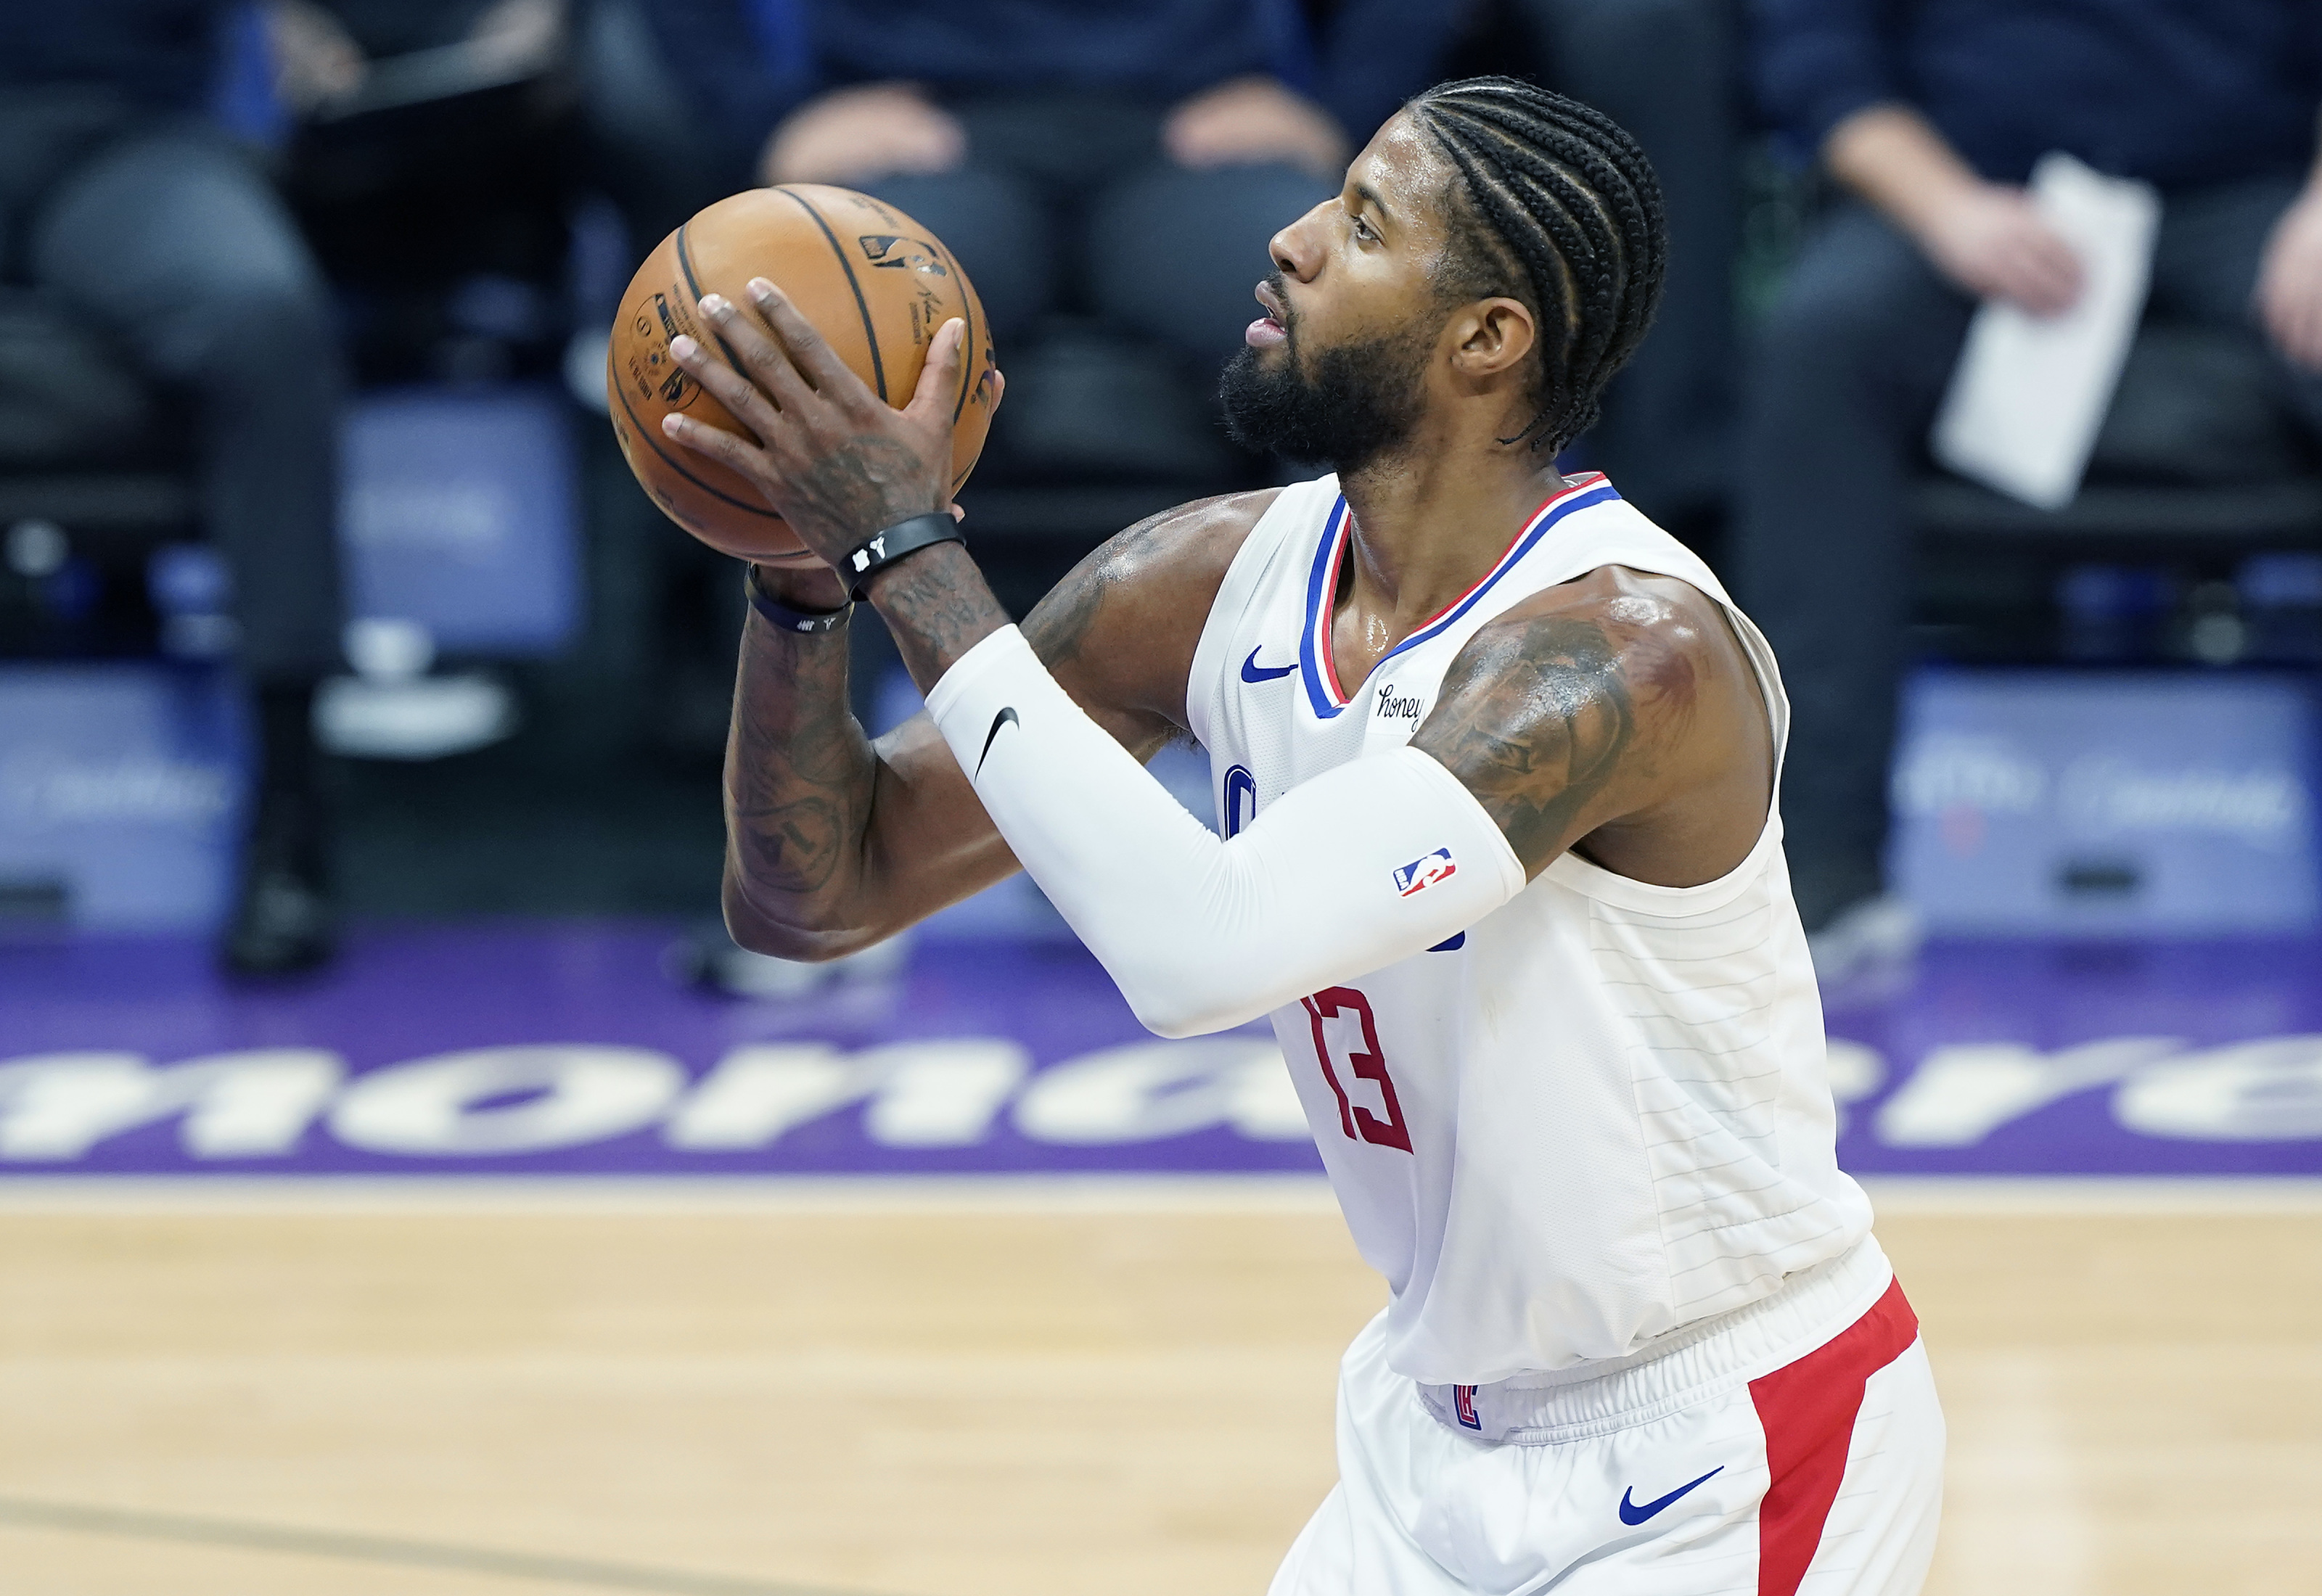 LA Clippers: Paul George is having the best 3-point season in the NBA